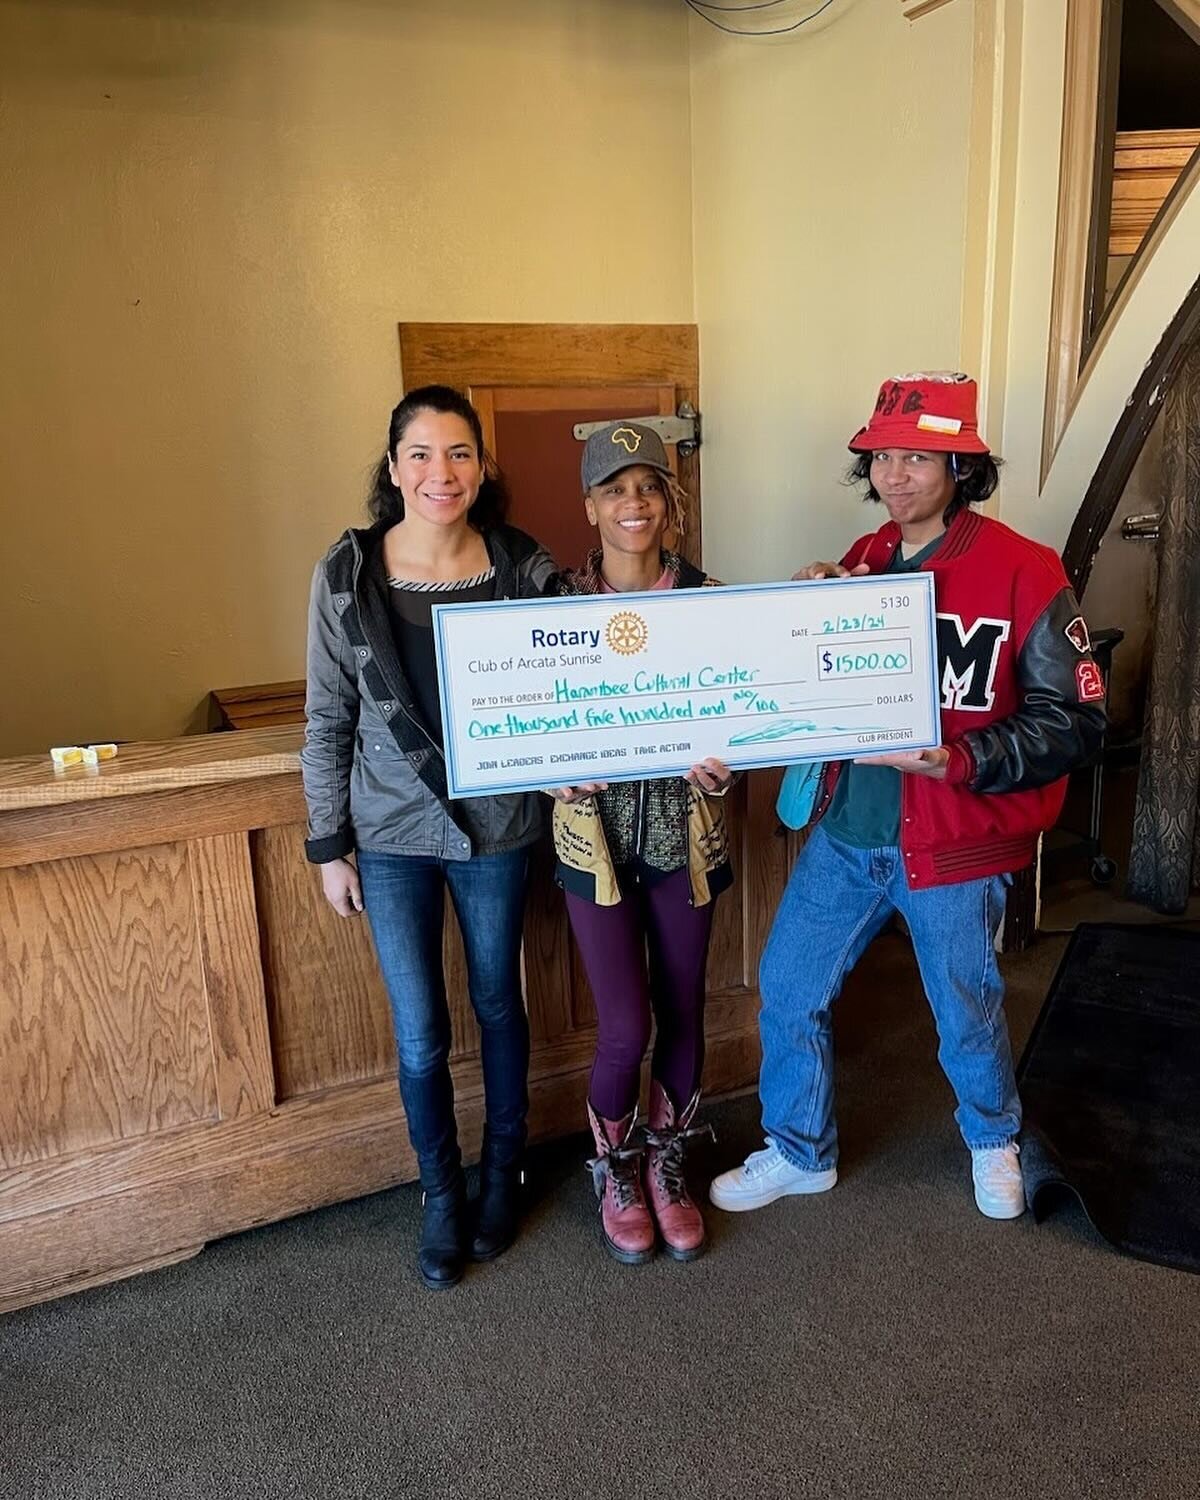 HC Black Music and Arts Association, a DreamMaker project of the Ink People, was honored to receive a donation from the Rotary Club of Arcata Sunrise, supporting HCBMAA's Harambee Cultural Center. 

The Cultural Center, located on 16th Street in Nort